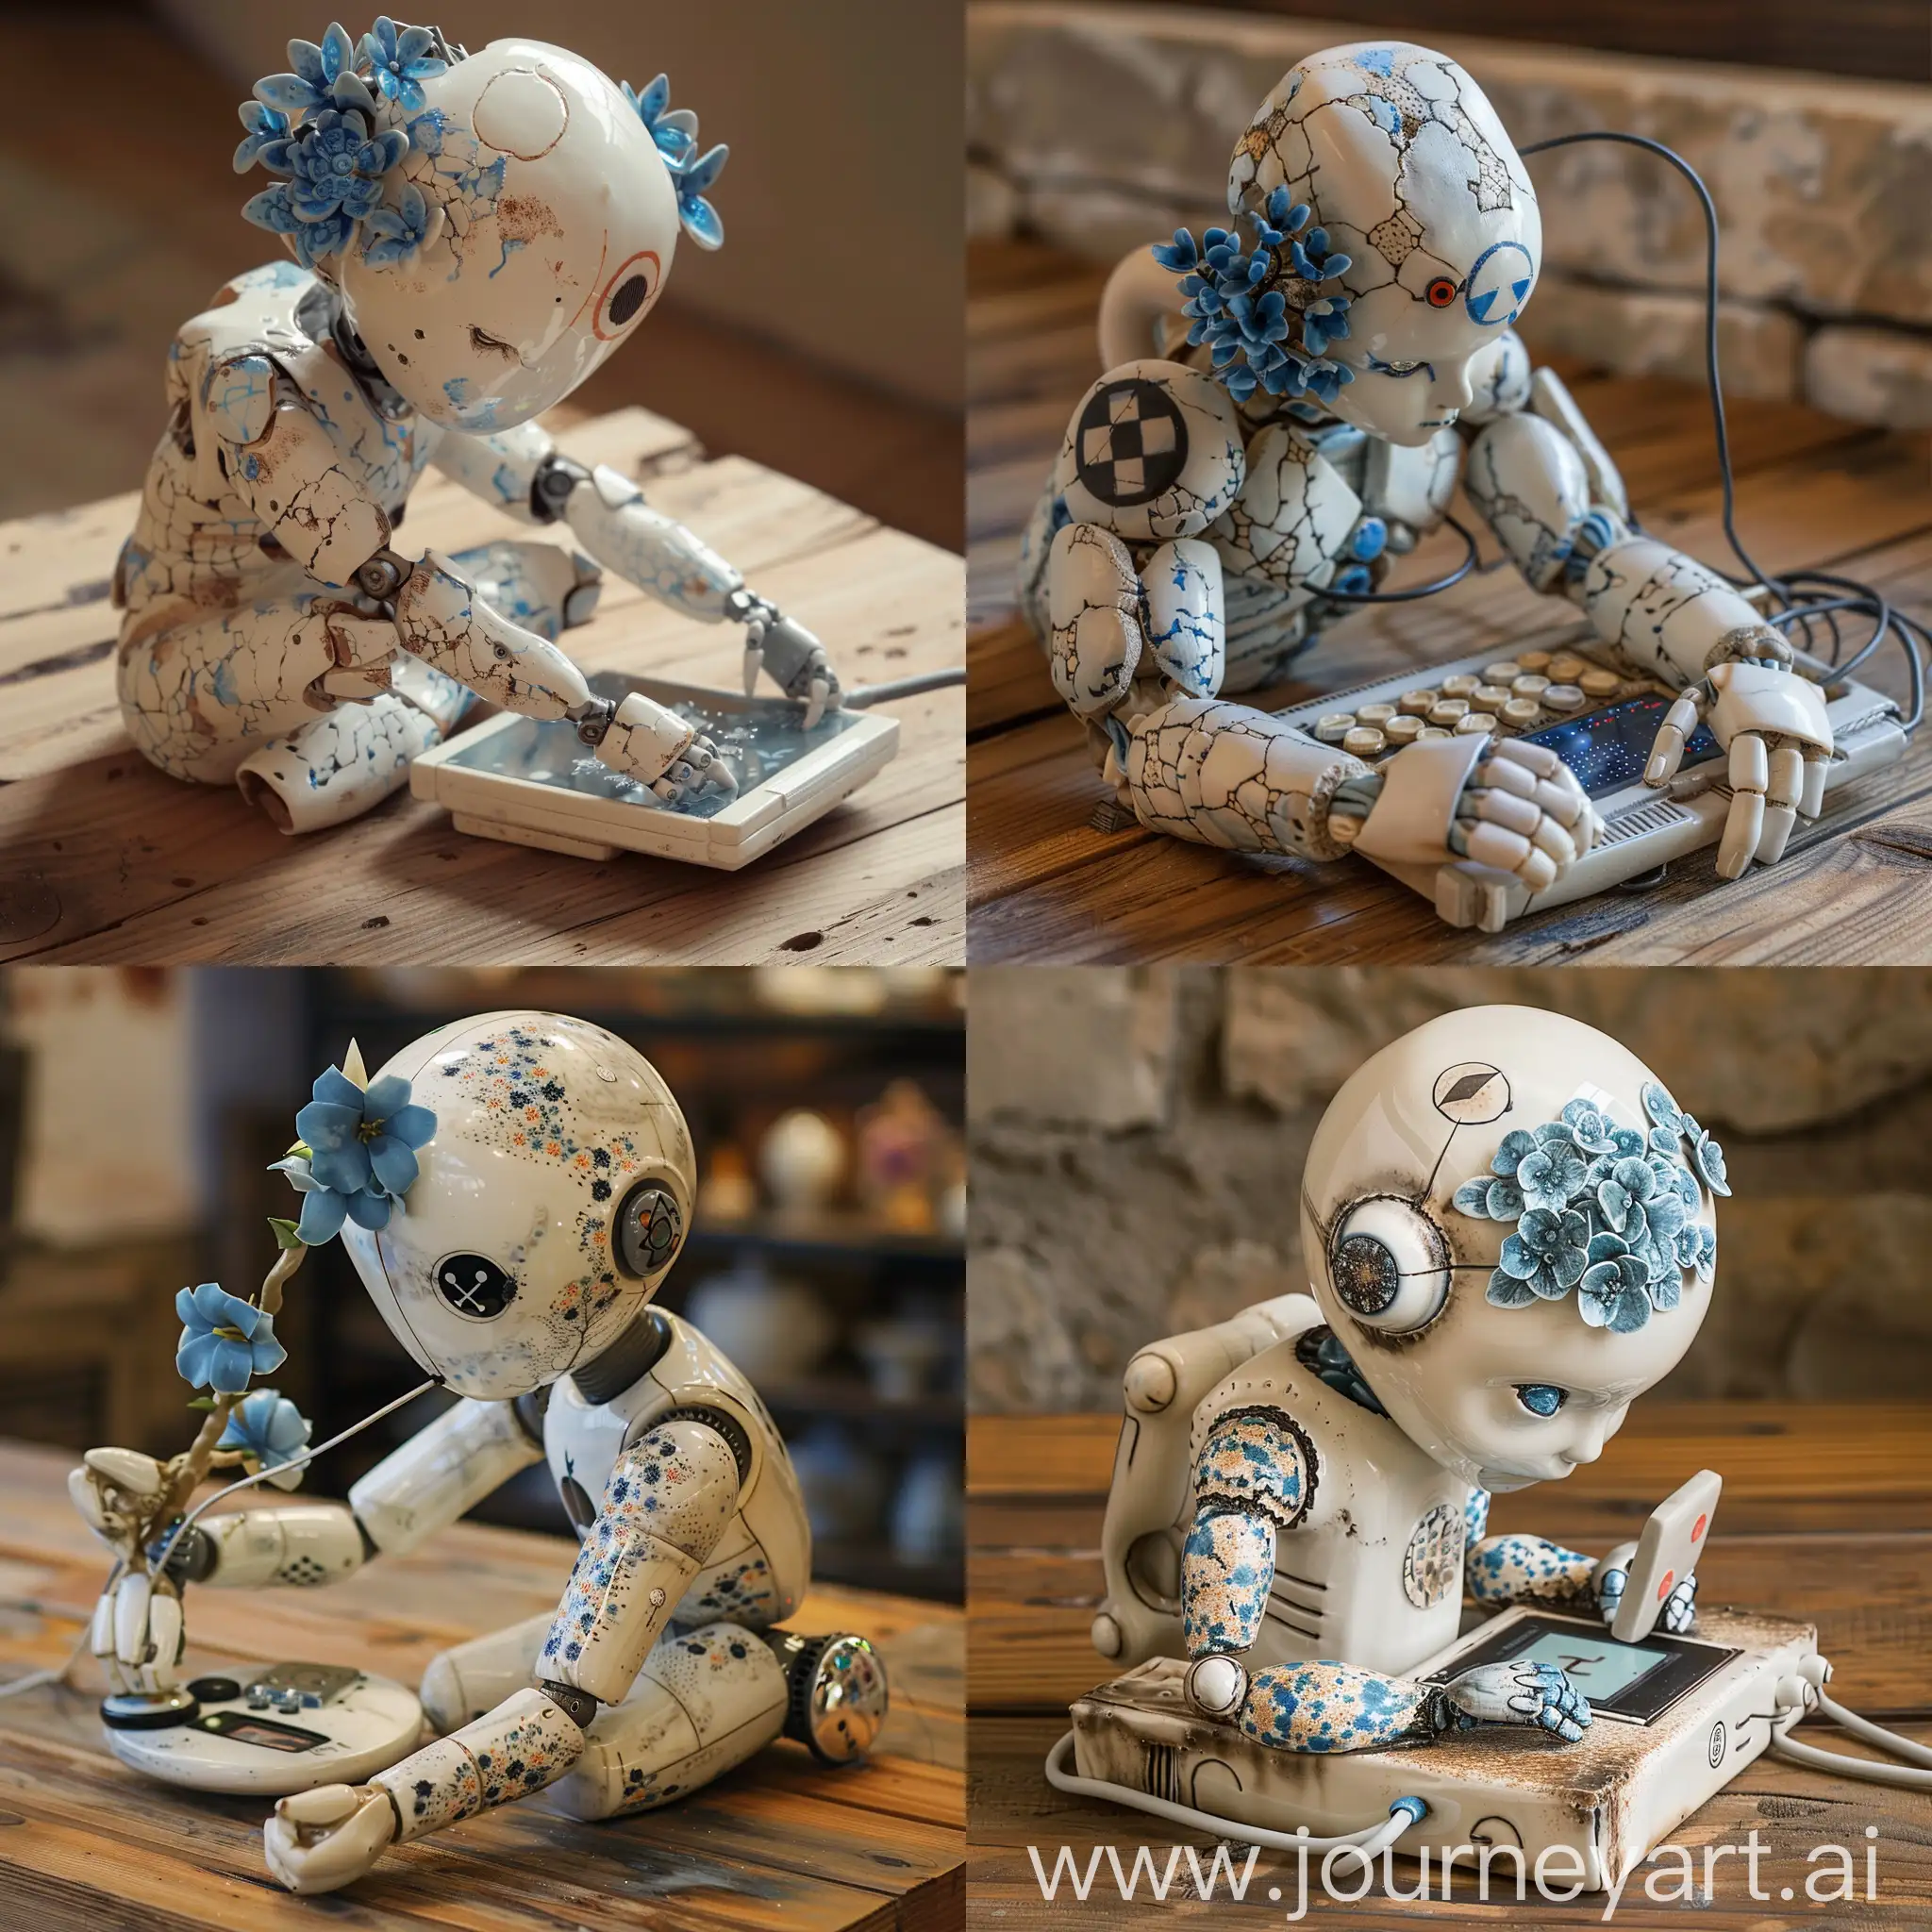 Ceramic-and-Porcelain-StoneFaced-Robot-with-Blue-Flowers-and-Target-Digi-Device-Work-on-Wooden-Table